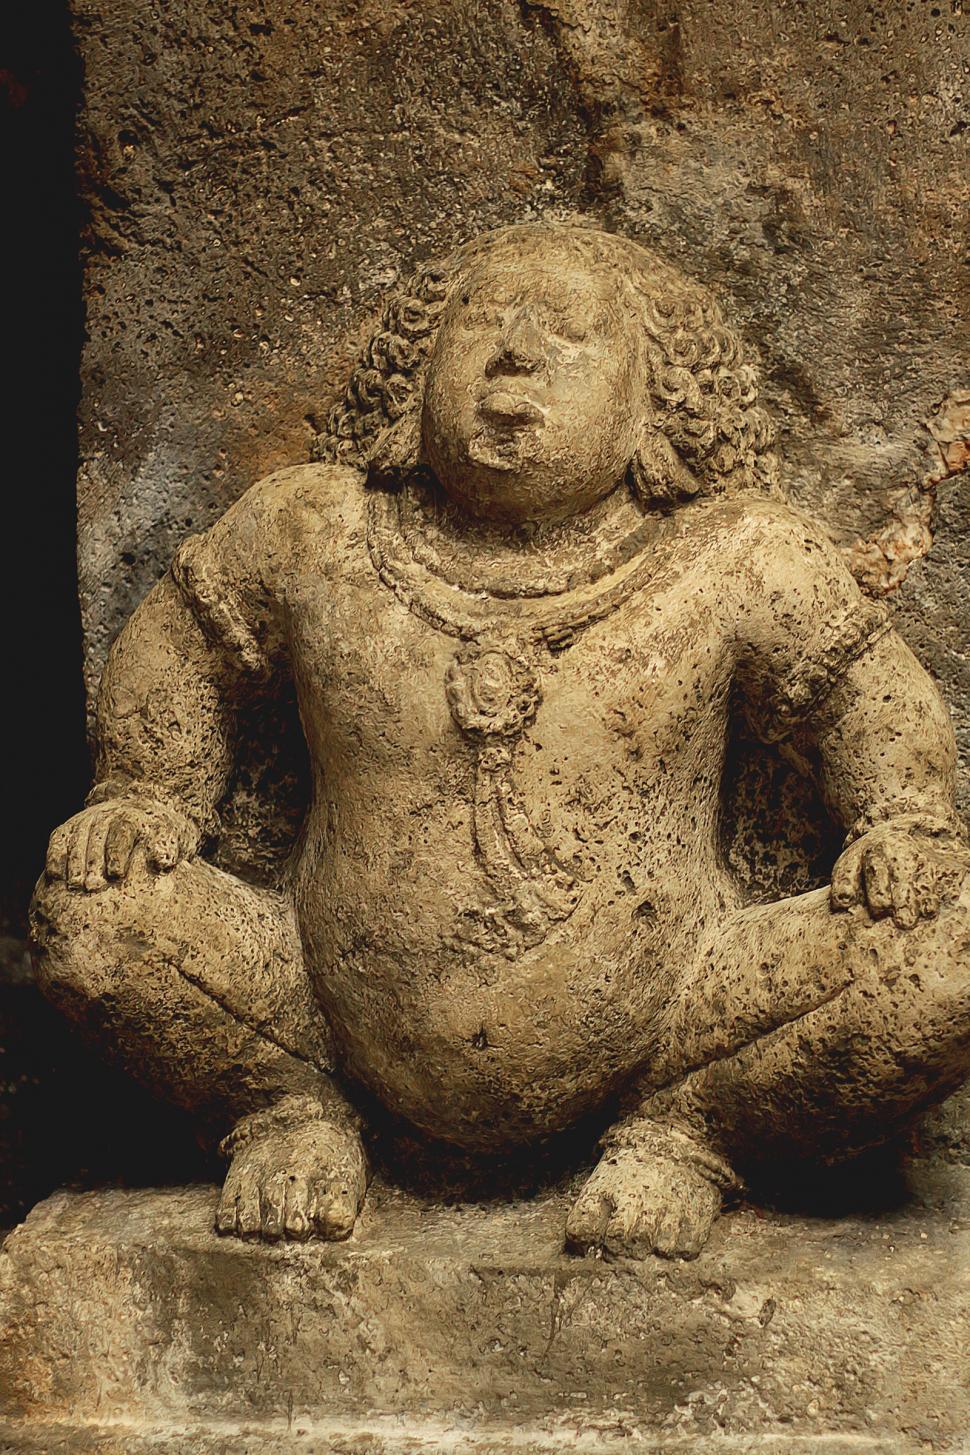 Free Image of Stone Carved Ancient Buddhist Sculpture Ancien Stone Sculpture from Ajanta Caves 